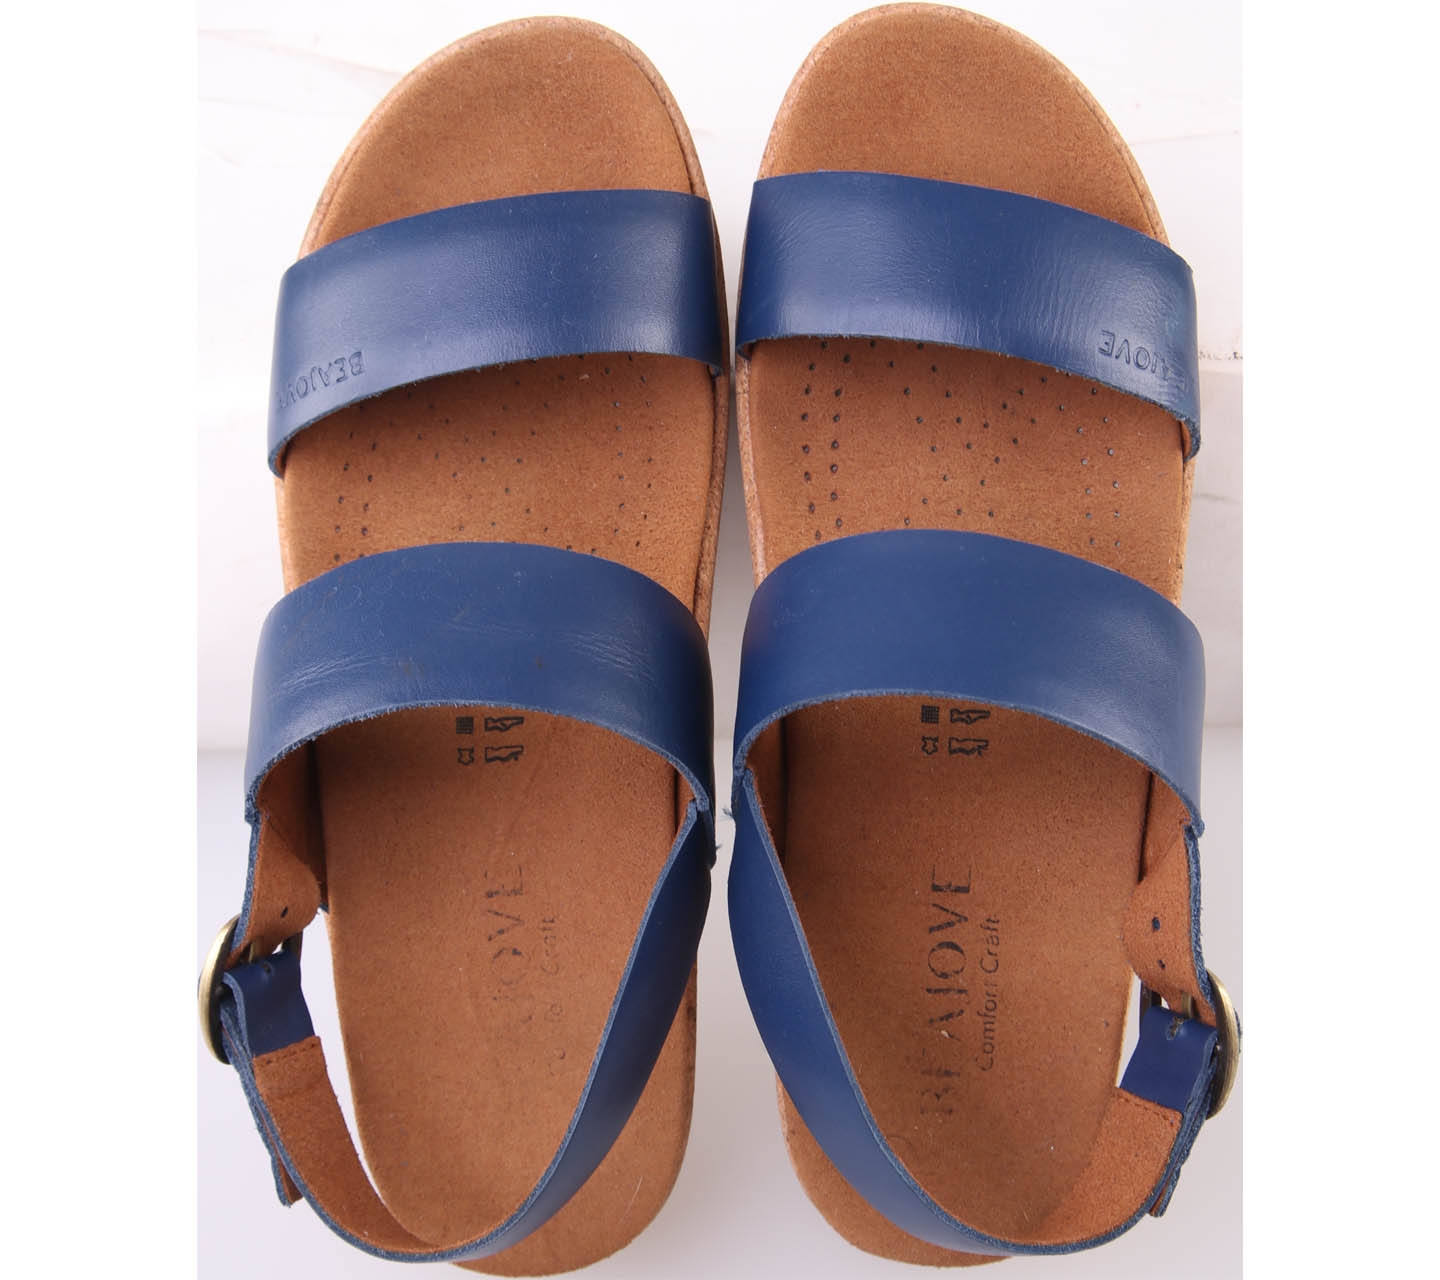 Beajove Brown And Blue Maple Sandals